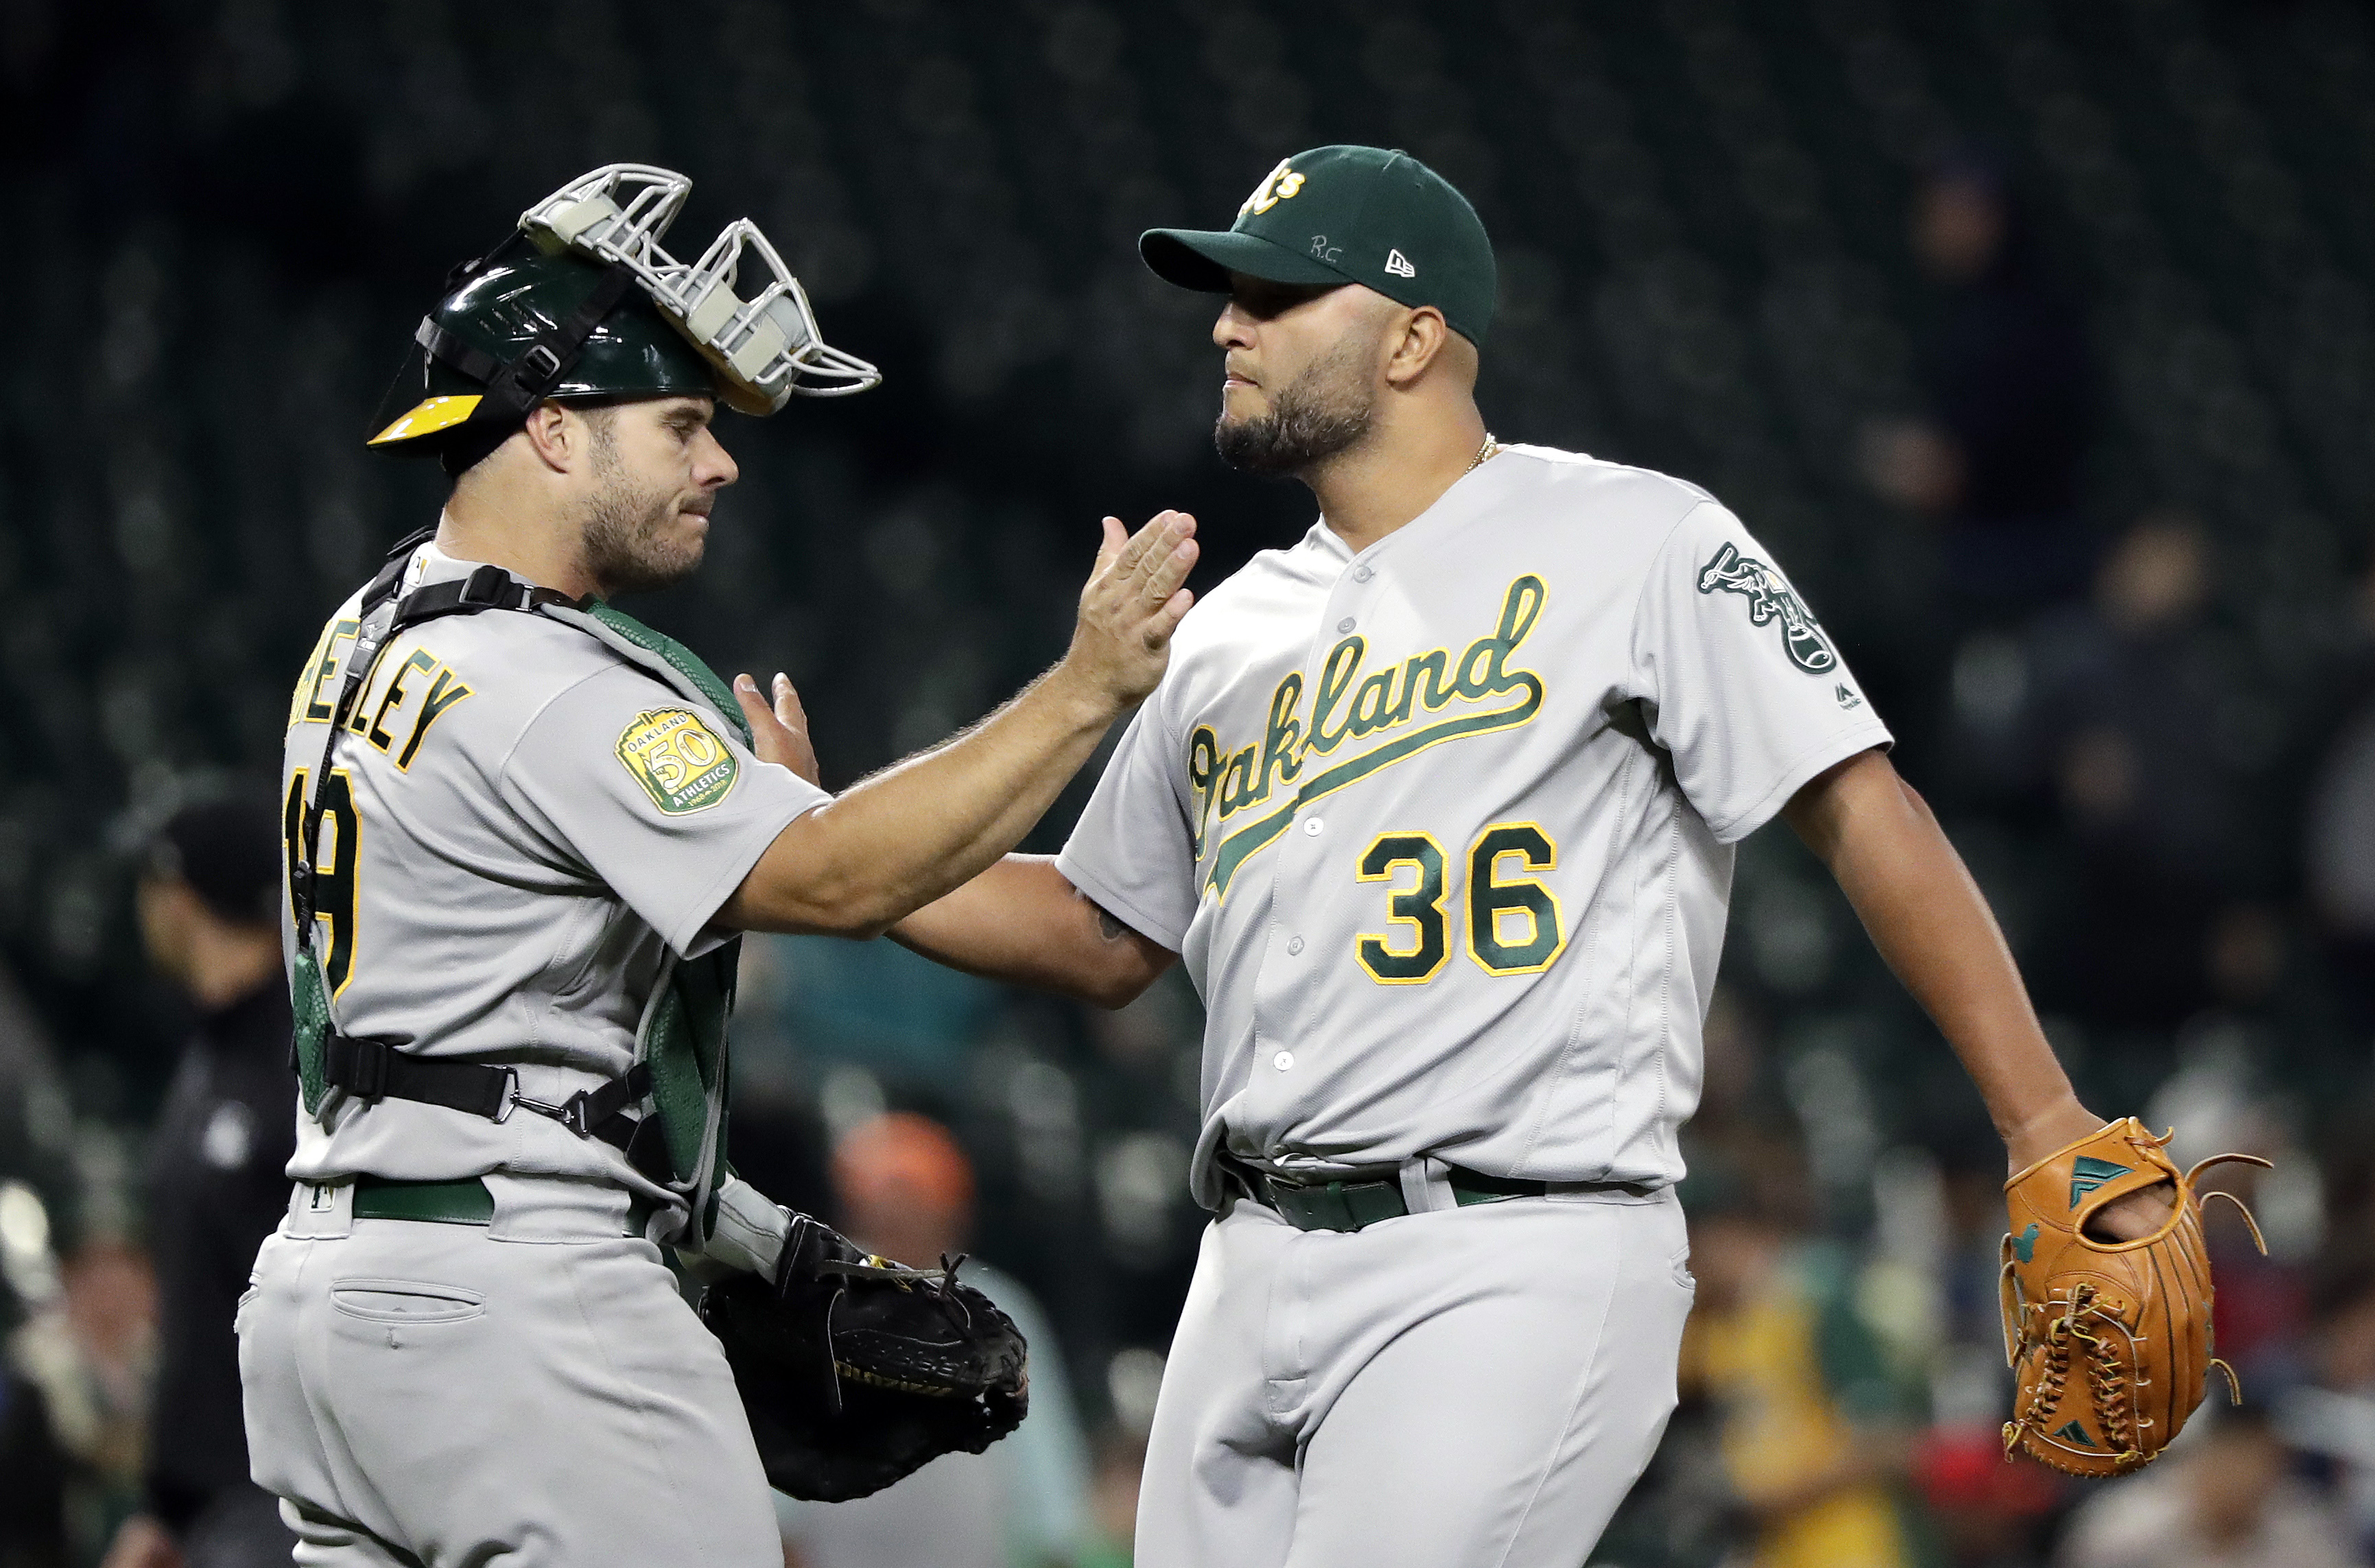 Olson’s slam helps A’s beat Mariners 9-3, close on Yankees